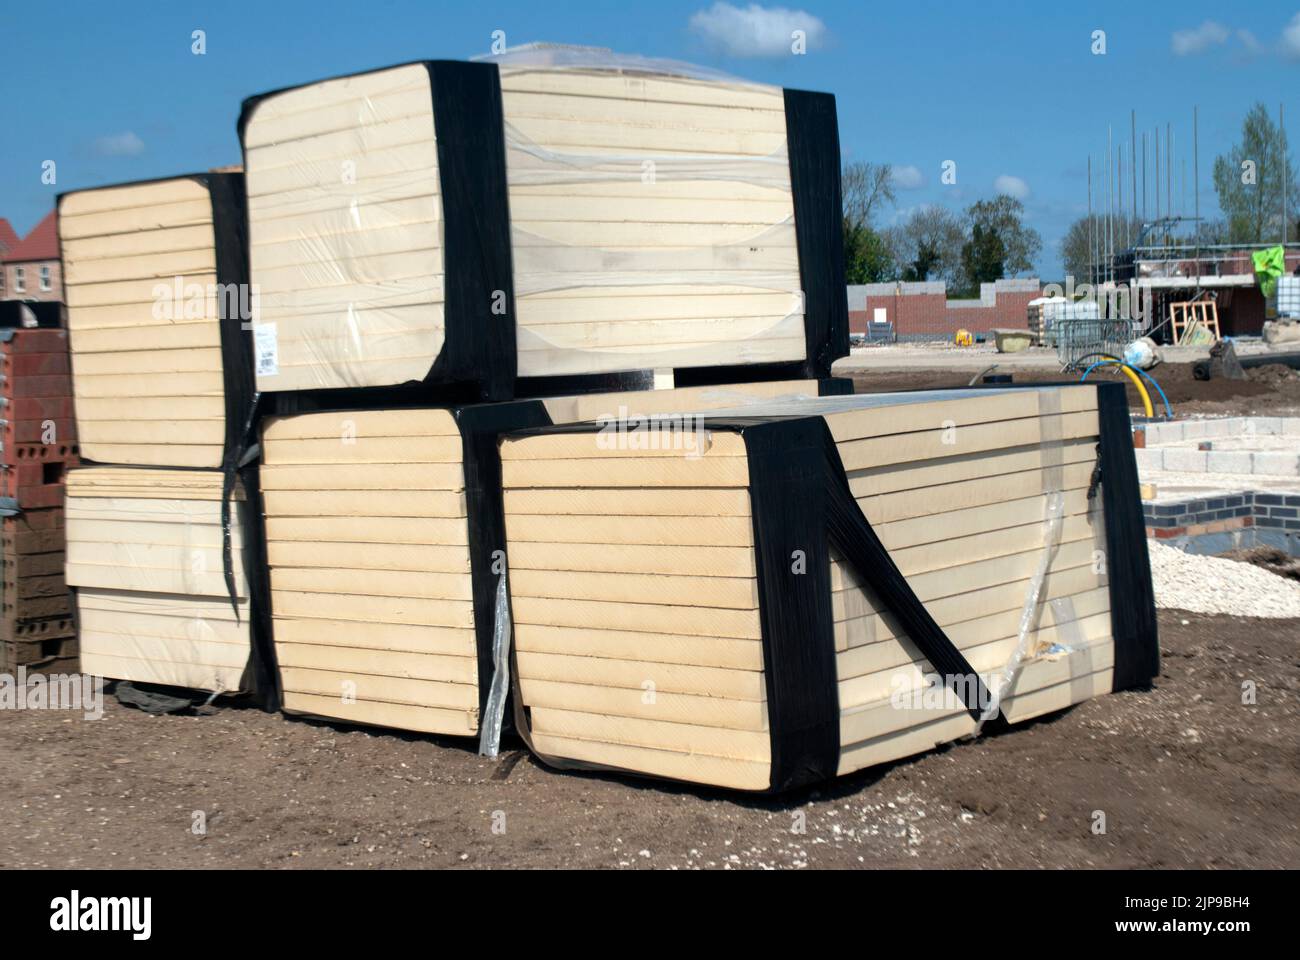 Newly constructed houses building site Stock Photo